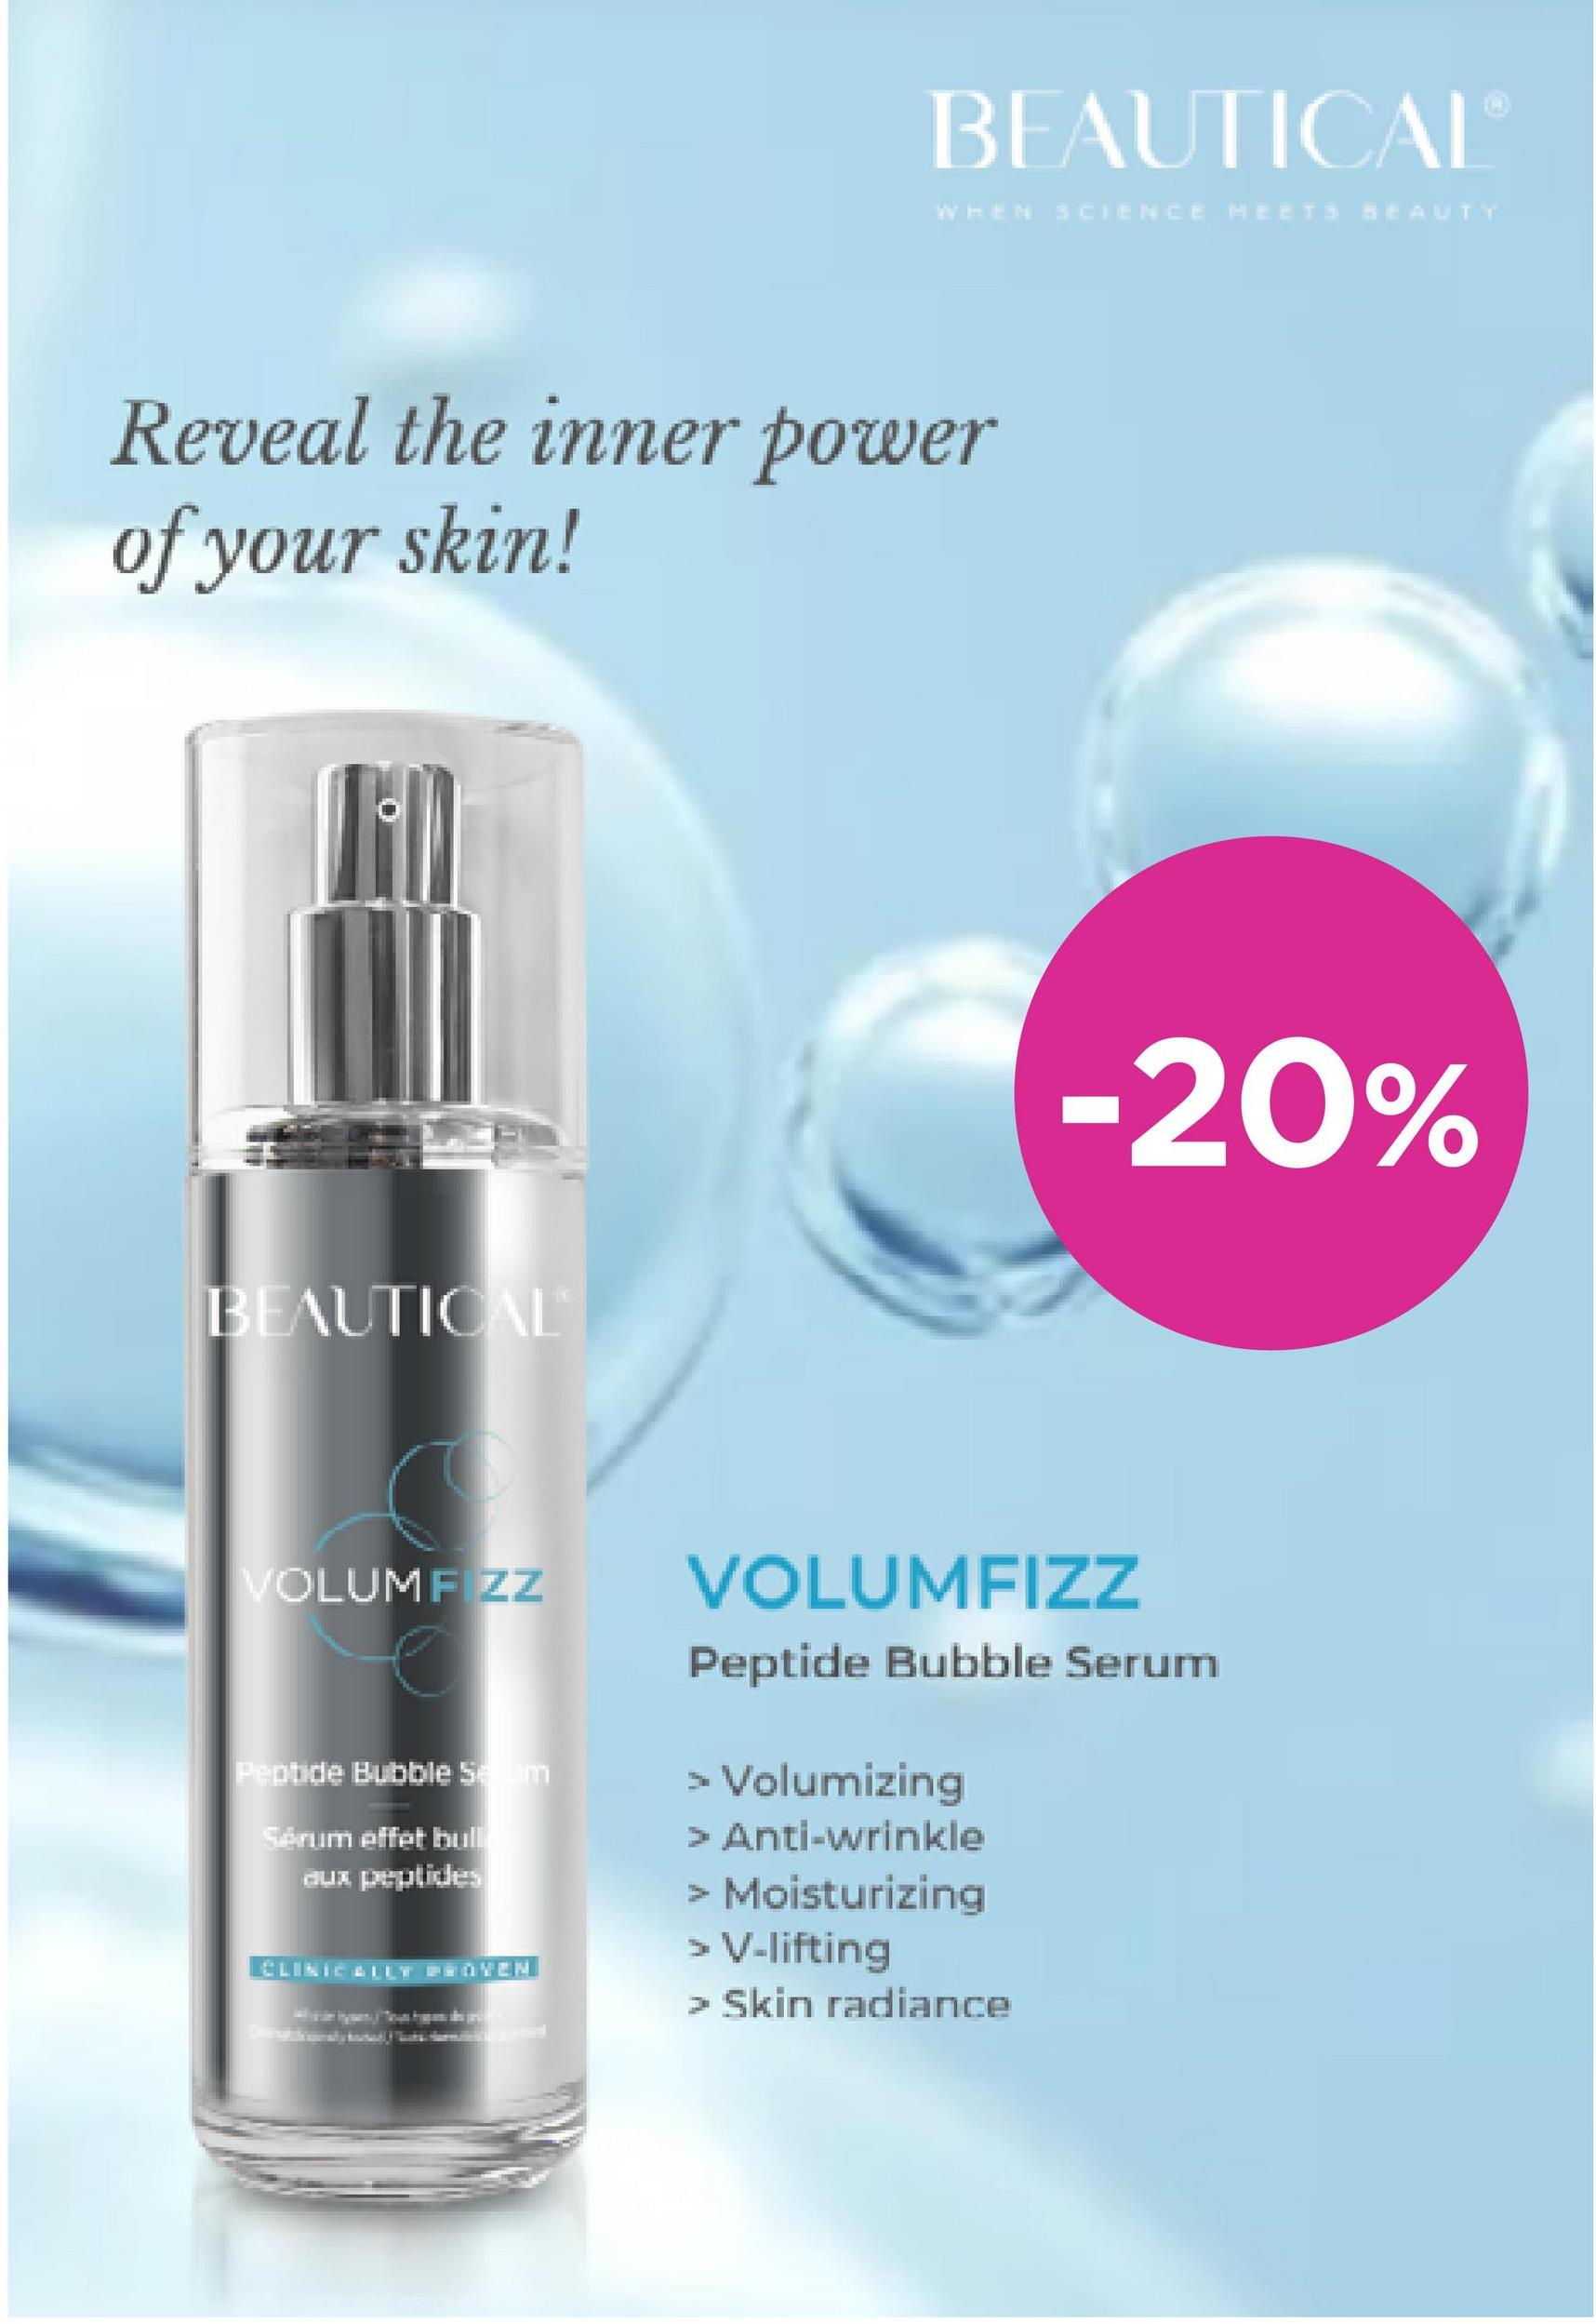 BEAUTICALⓇ
WHEN SCIENCE MEETS BEAUTY
-20%
Reveal the inner power
of your skin!
BEAUTICAL
VOLUMF ZZ
Peptide Bubble Secum
Sérum effet bull
aux peptides
CLINICALLT PROVEN
VOLUMFIZZ
Peptide Bubble Serum
> Volumizing
> Anti-wrinkle
Moisturizing
> V-lifting
> Skin radiance